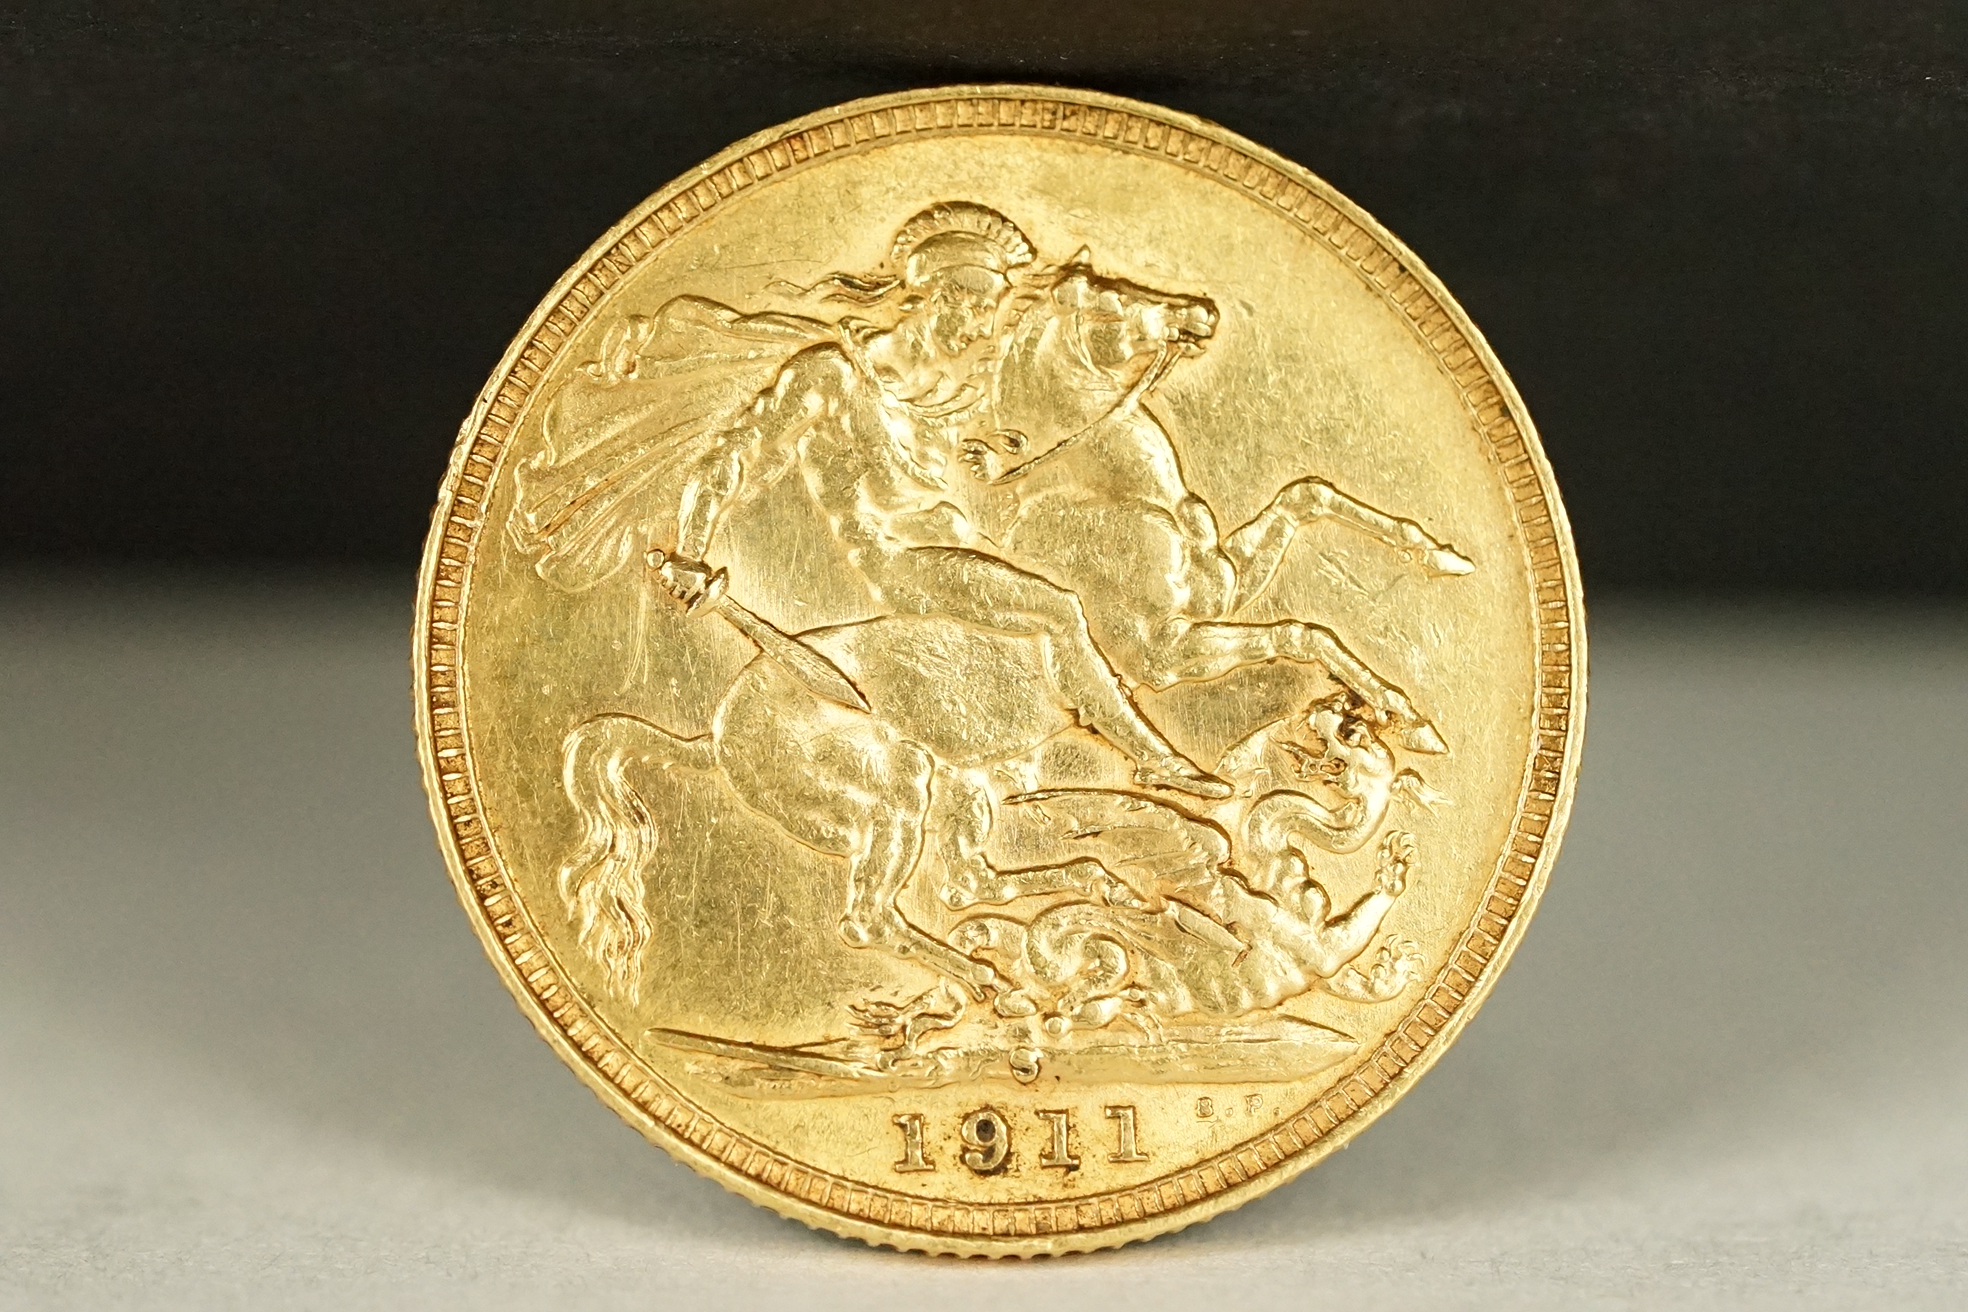 A King George V 1911 gold full sovereign coin with Sydney Mint mark.